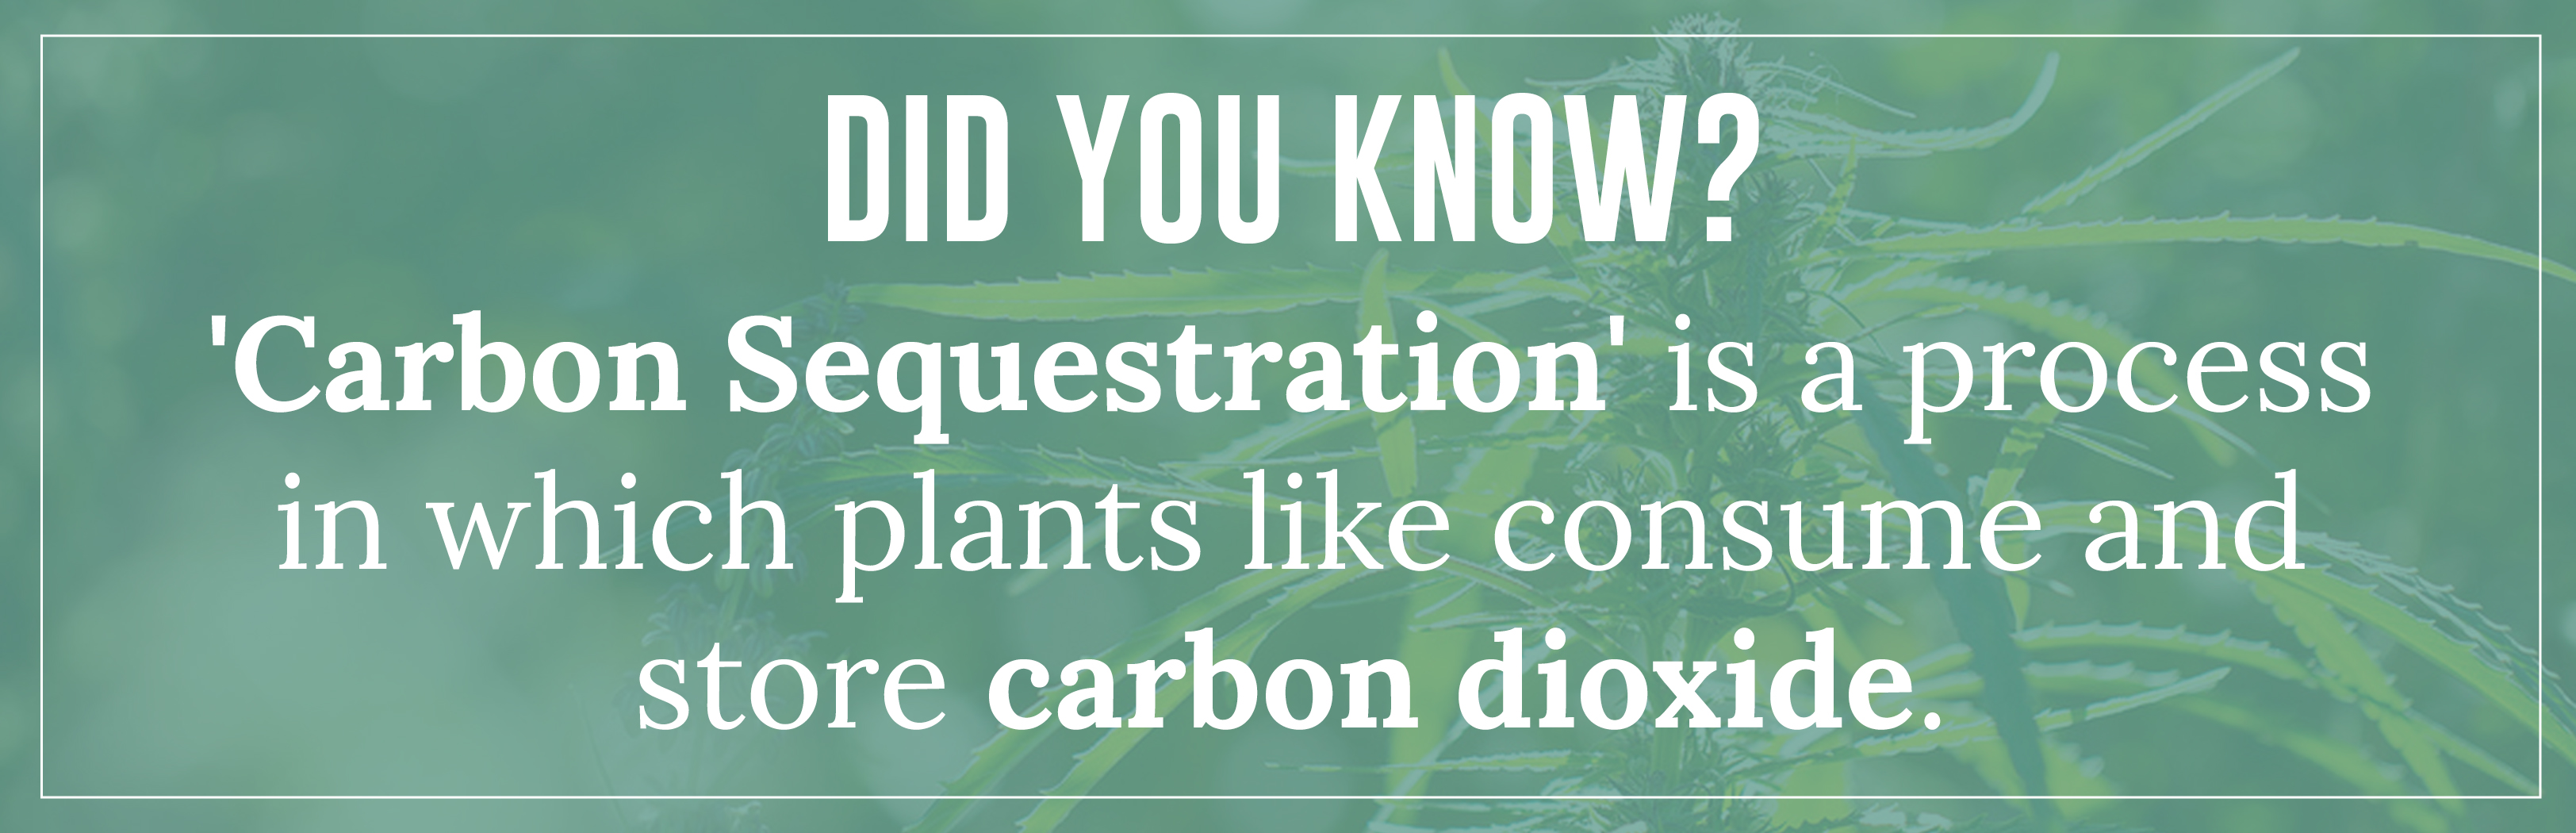 'Carbon Sequestration' is a process in which plants like consume and store carbon dioxide.